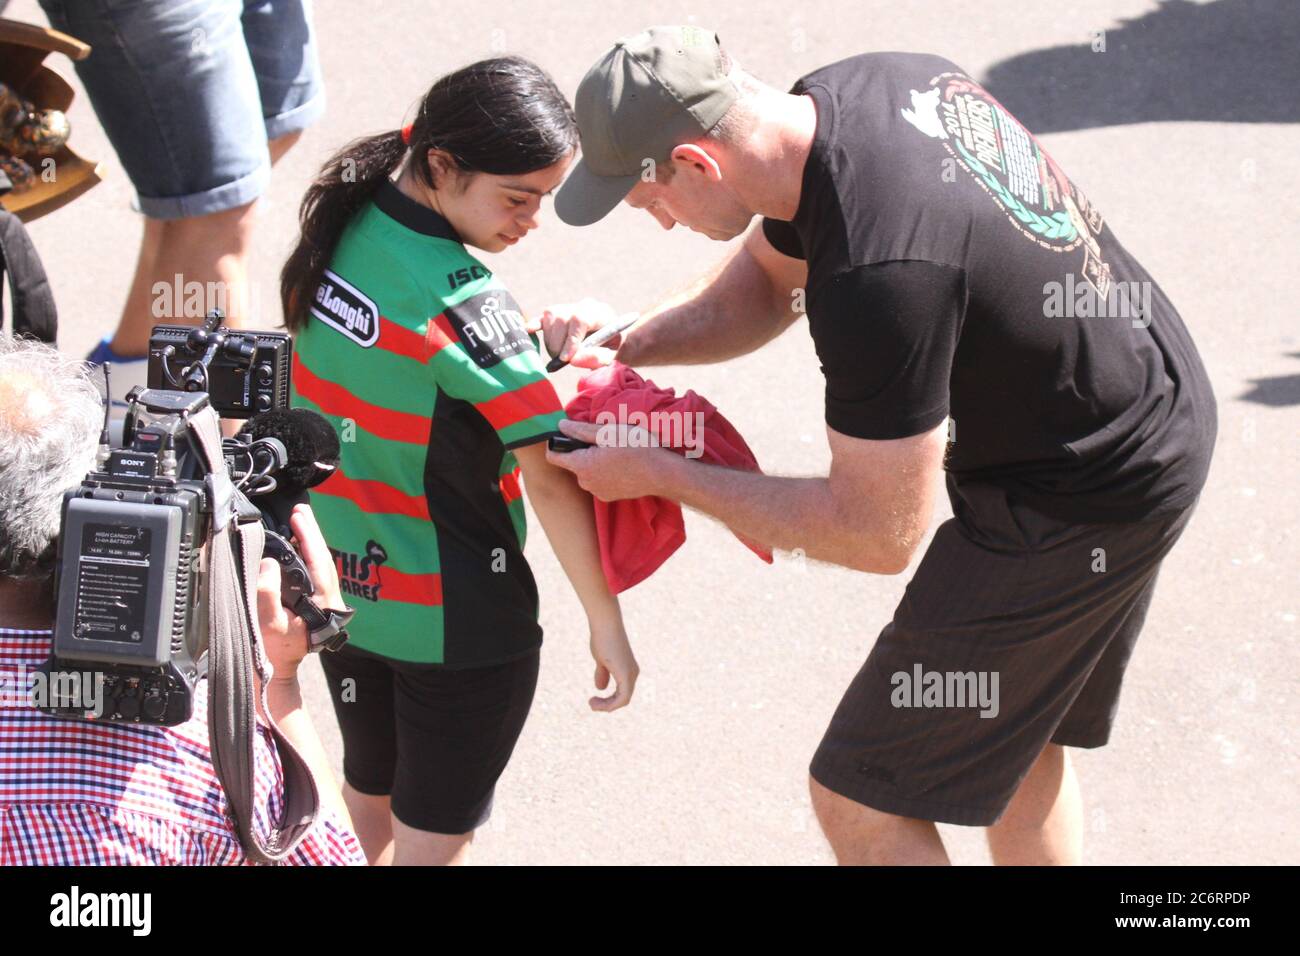 South Sydney Rabbitohs Coach Michael Maguire signs an autograph for a fan as he leaves an event at Redfern Ova celebrating the NRL grand final victory Stock Photo